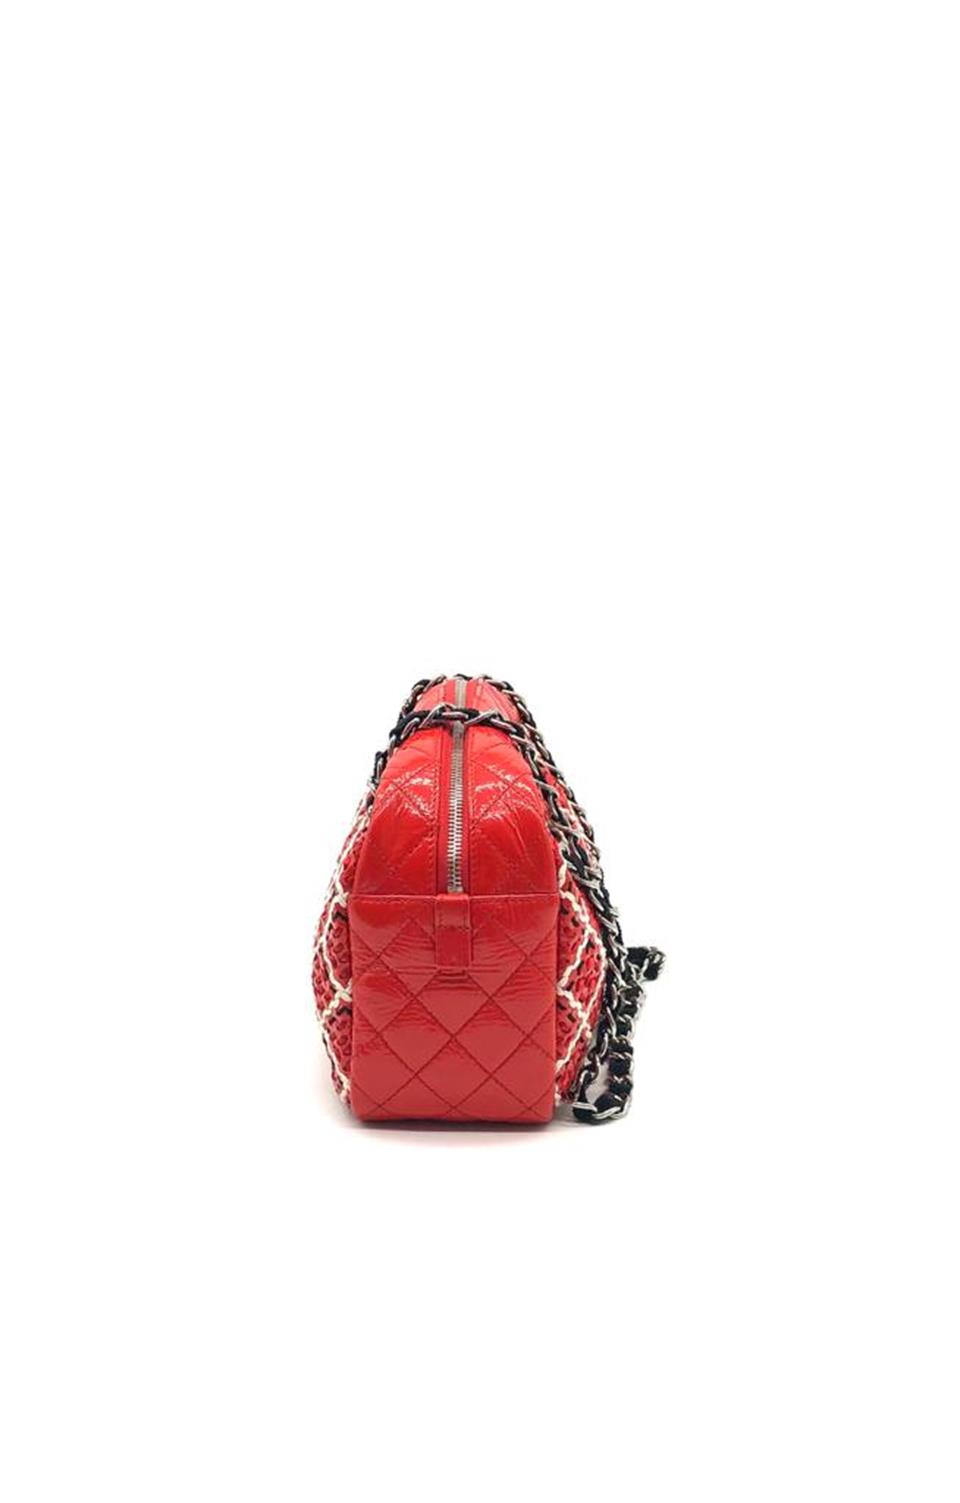 Chanel Red Patent Leather Woven Fabric Camera Bag Deluxe Seconds'ta